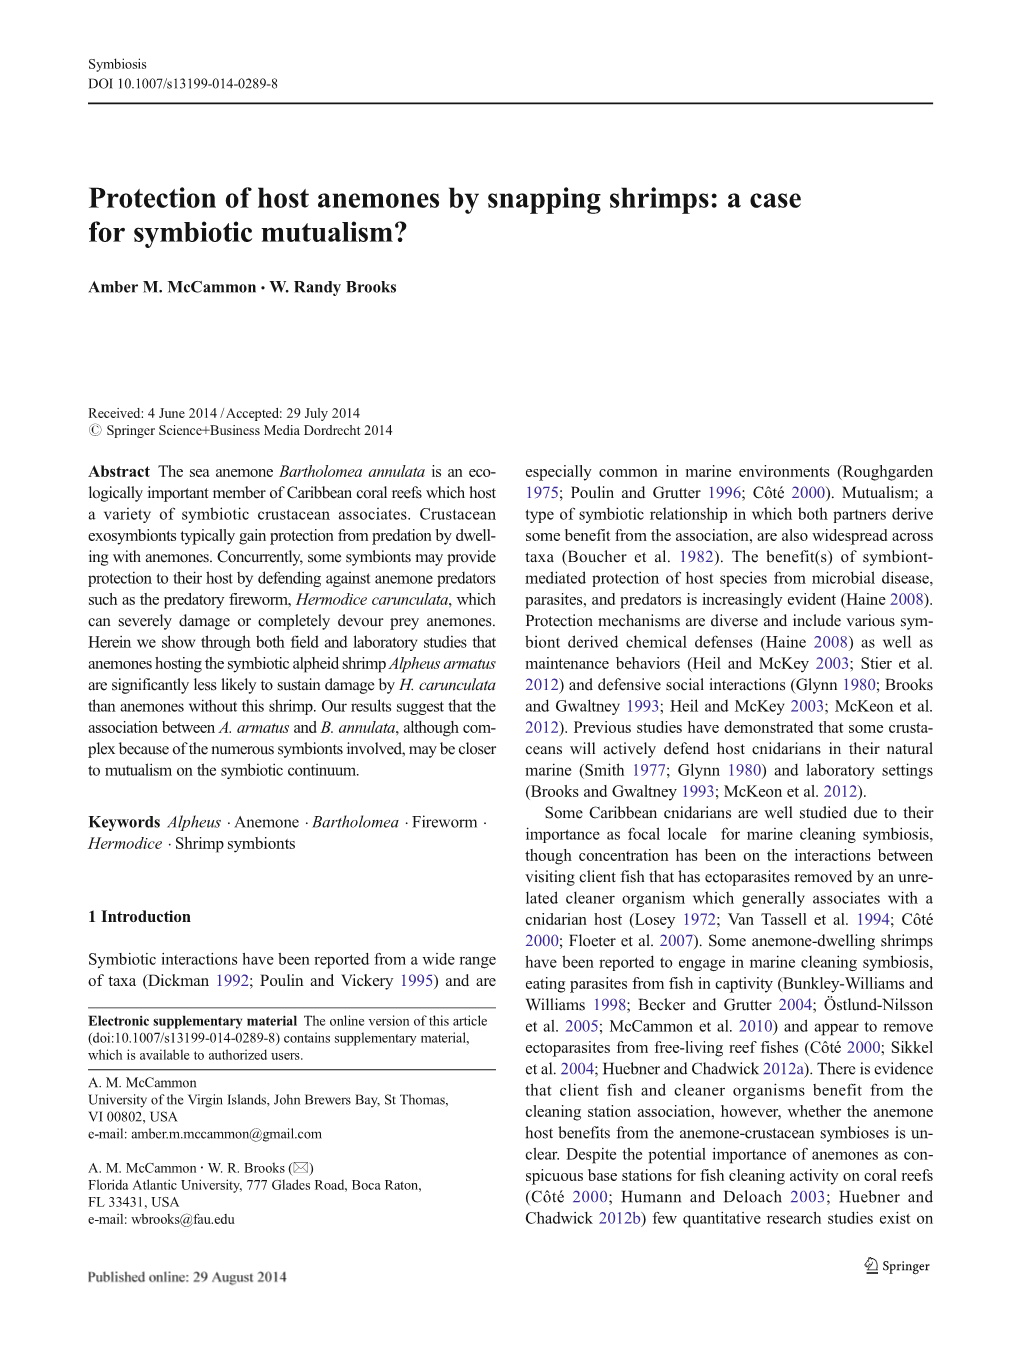 Protection of Host Anemones by Snapping Shrimps: a Case for Symbiotic Mutualism?